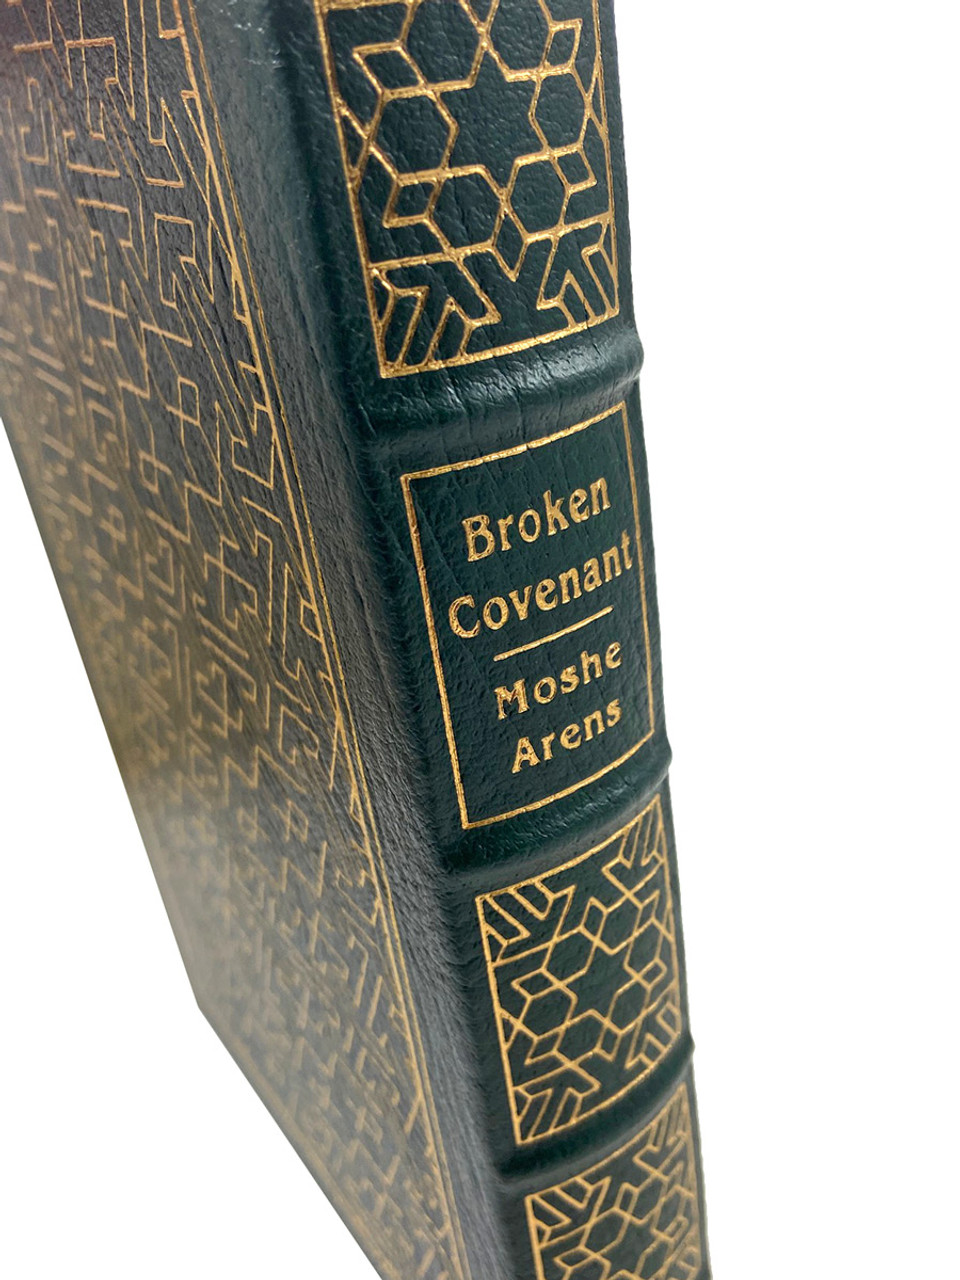 Moshe Arens "Broken Covenant" Signed First Edition, Leather Bound Collector's Edition [Sealed]